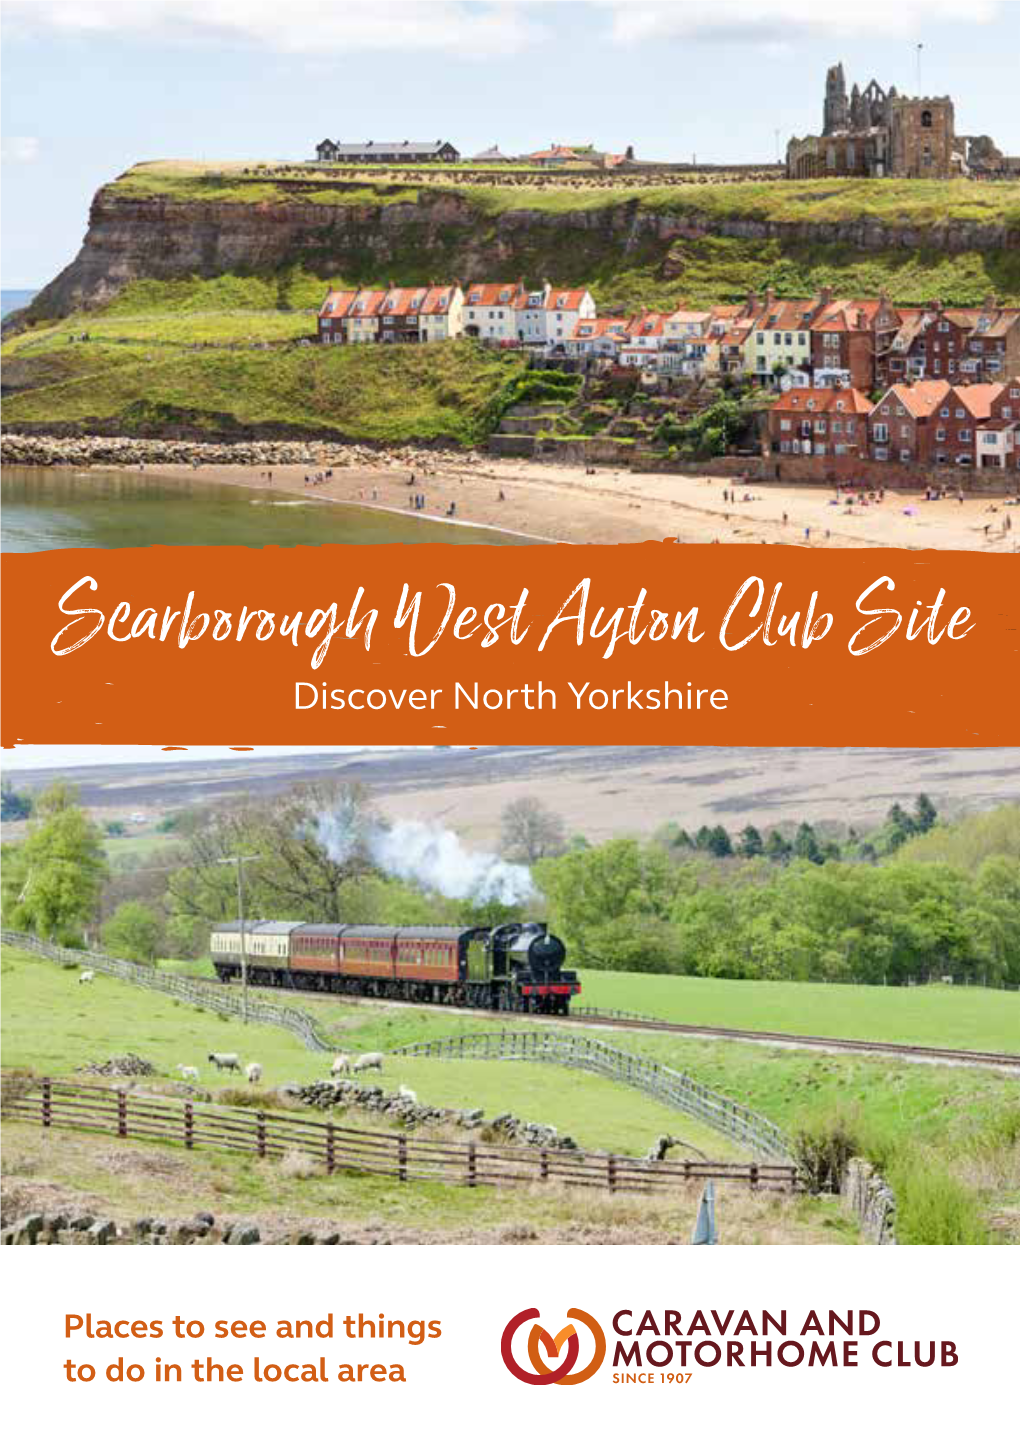 Scarborough West Ayton Club Site Discover North Yorkshire